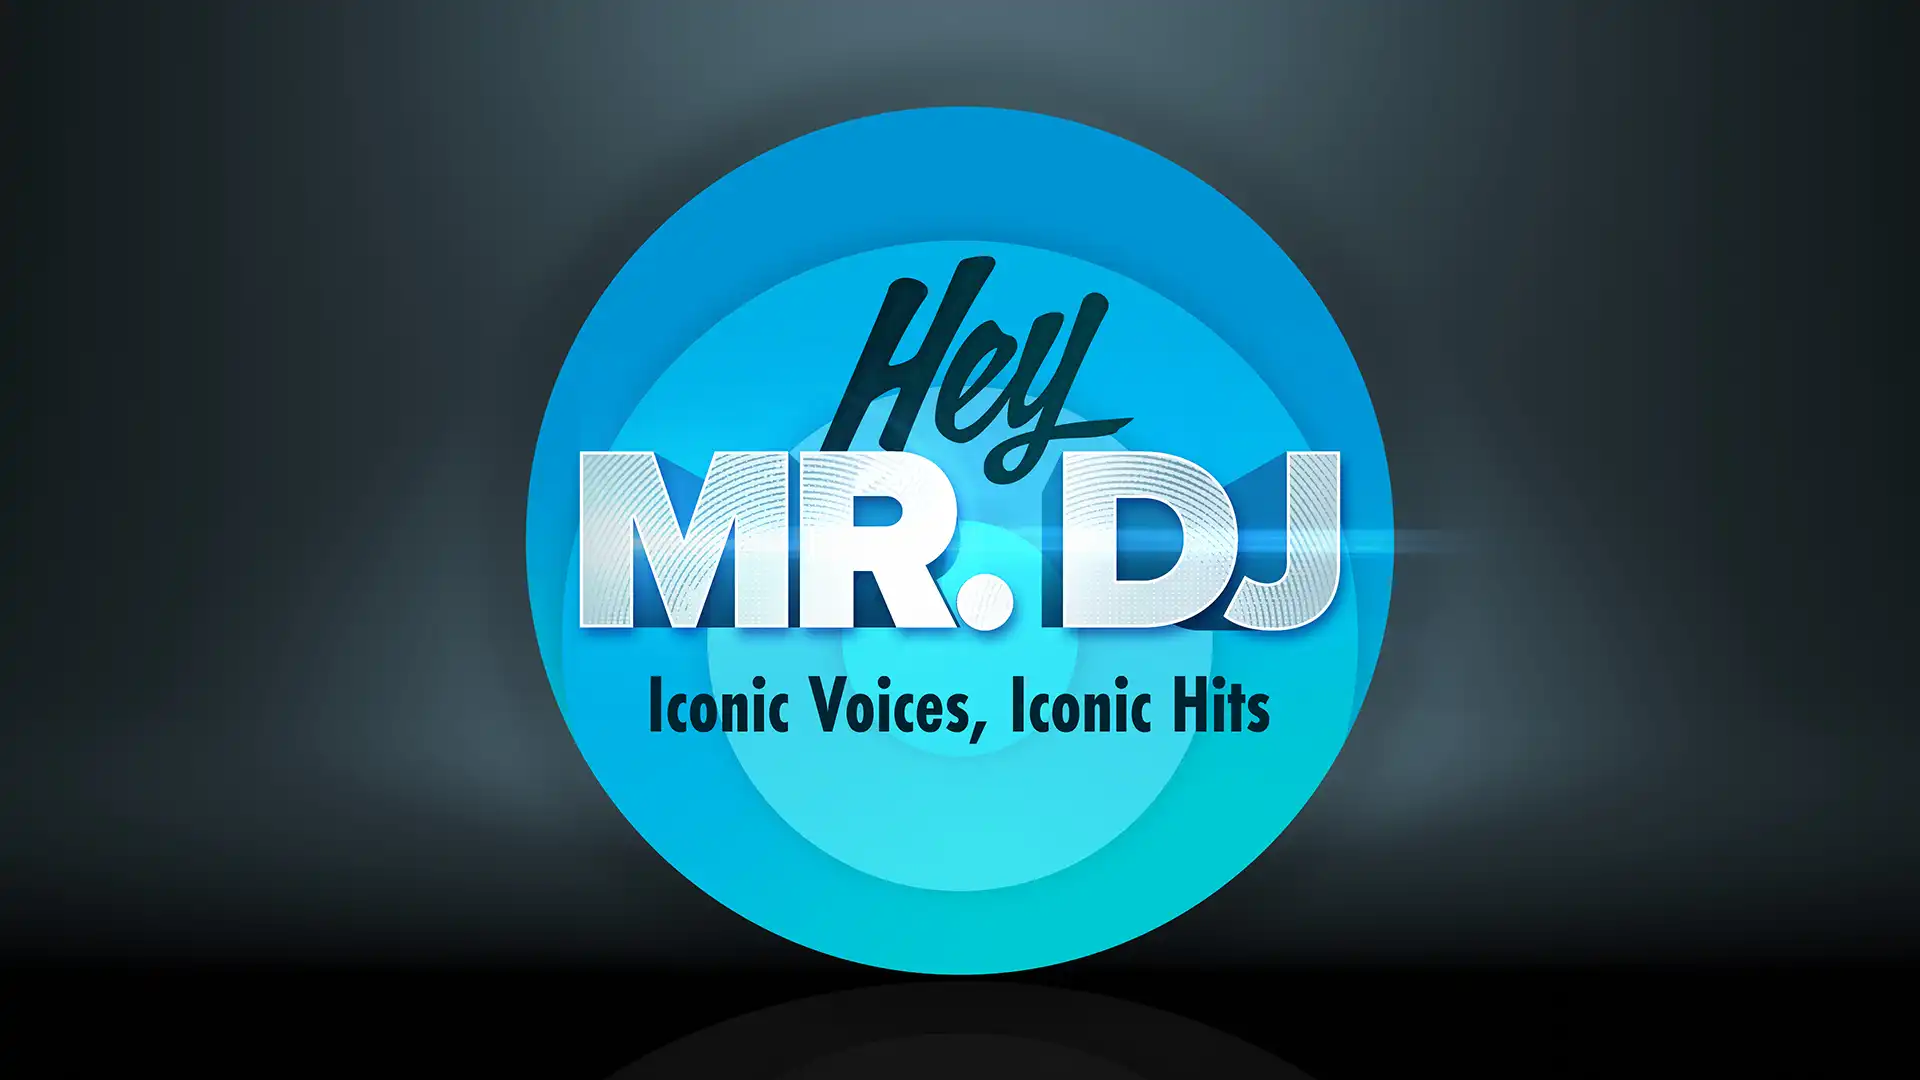 Art that says "Hey, Mr. DJ" with black and white font and blue-toned background.